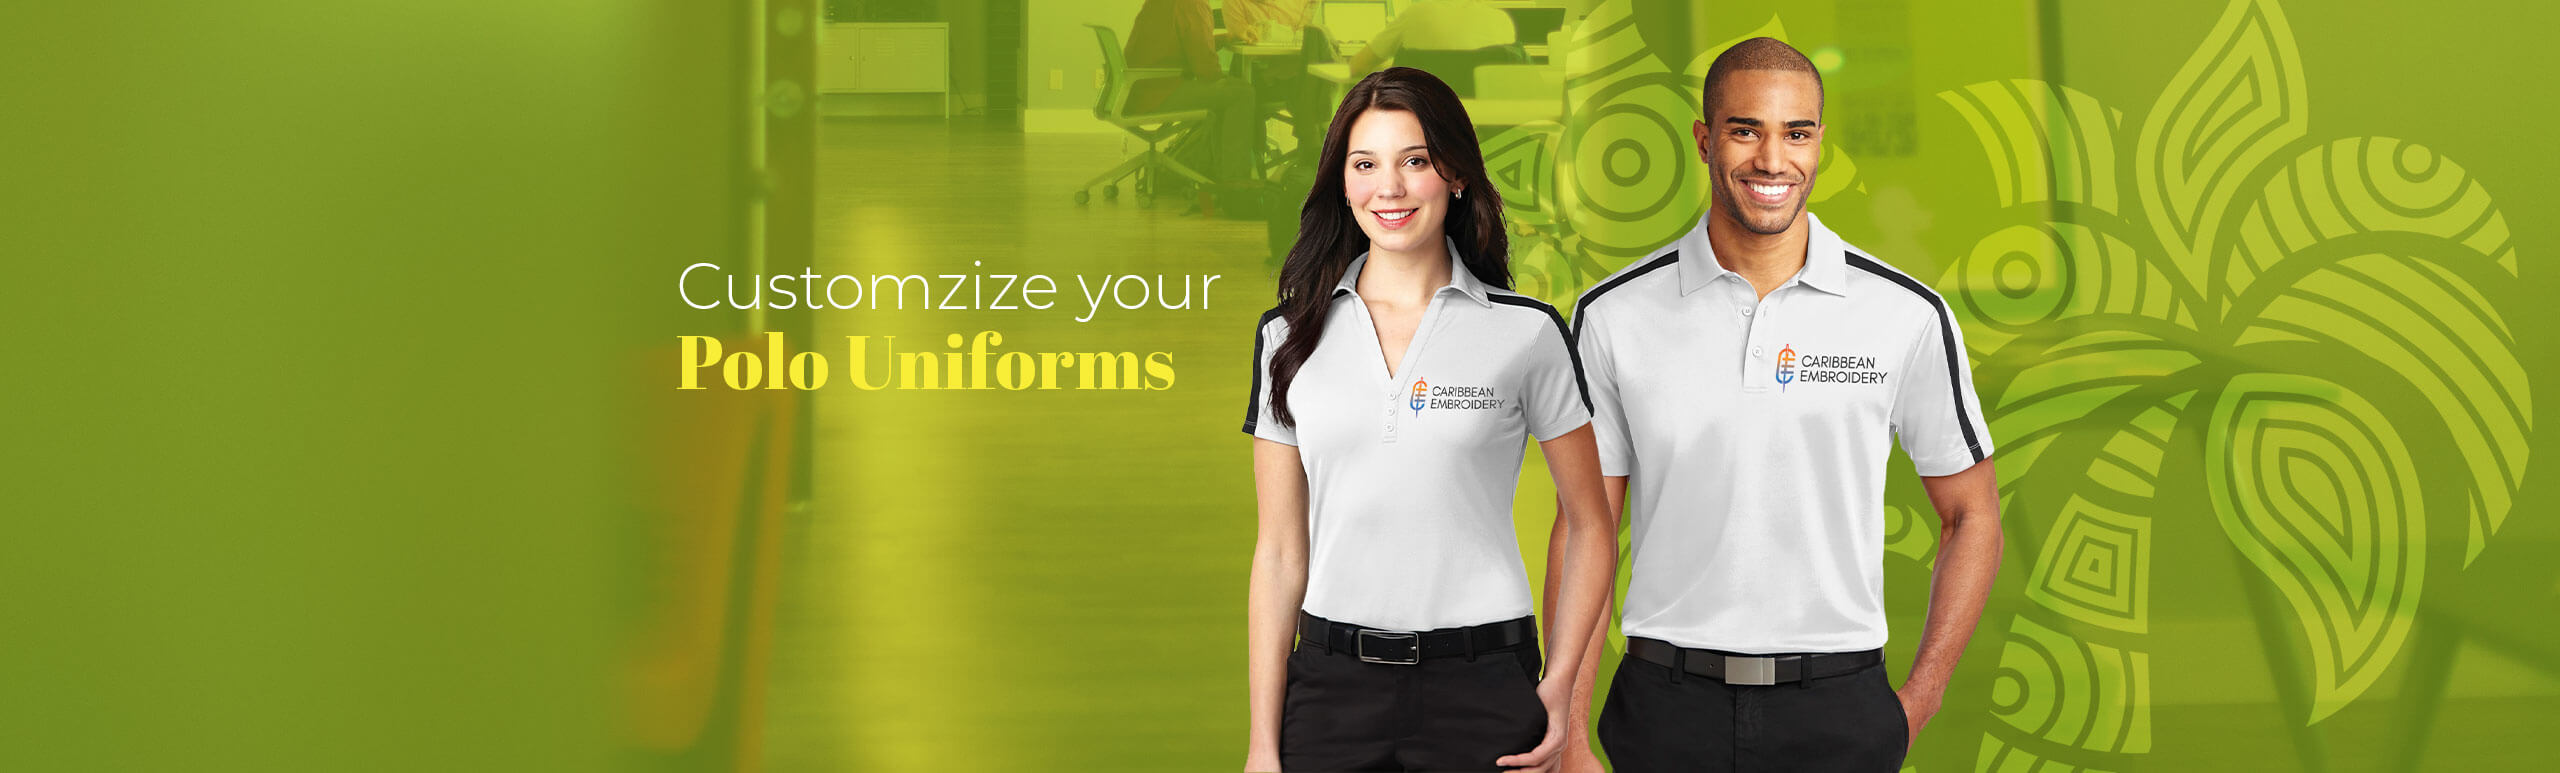 Customized Polo Uniforms at Caribbean Embroidery